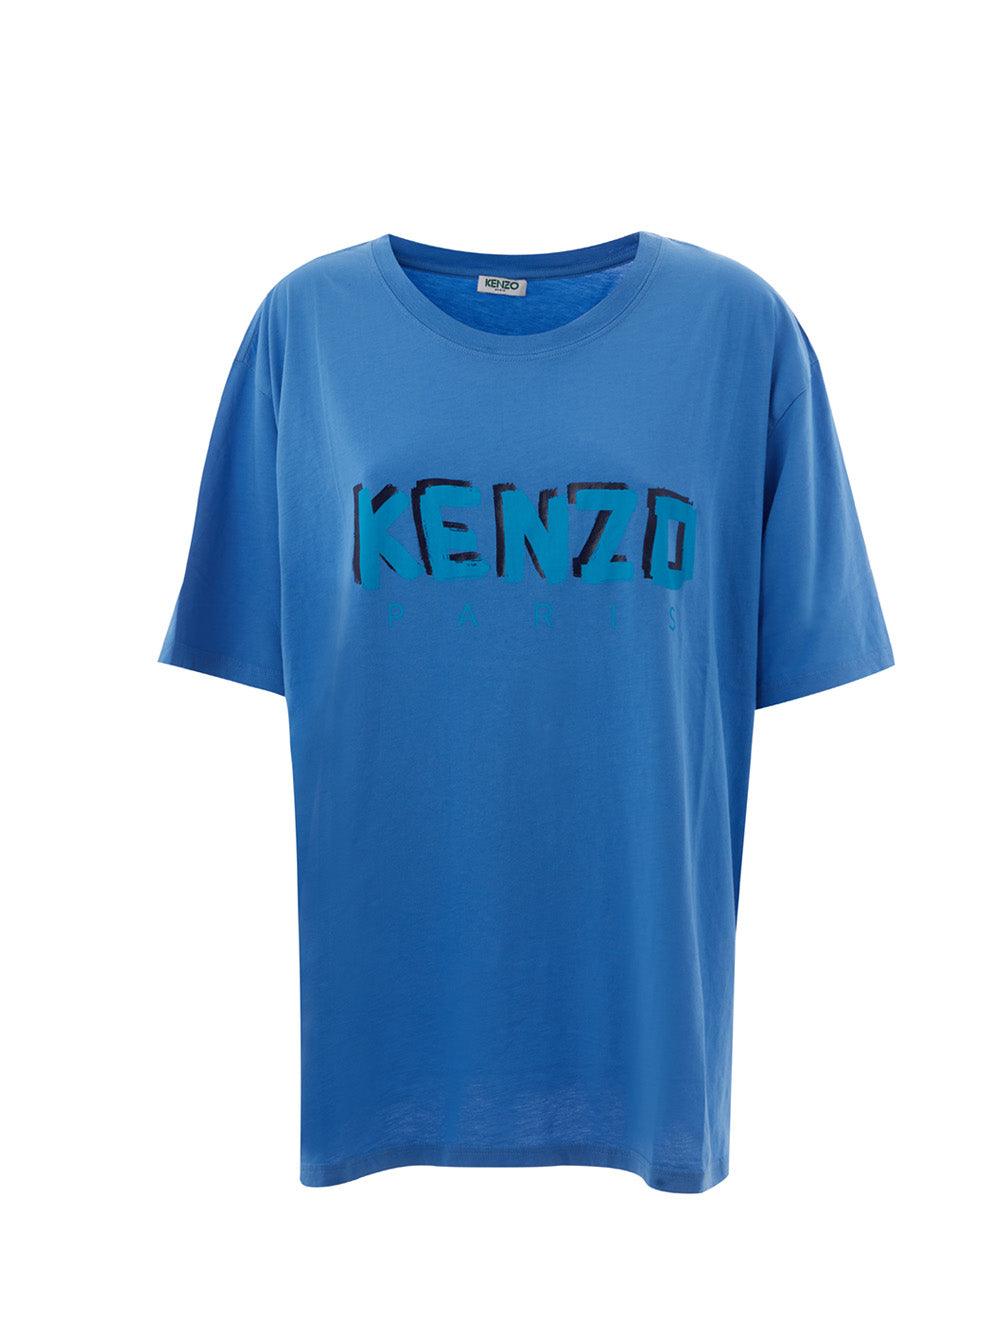 Kenzo Blue Cotton T-Shirt with Contrasting Painting Logo - Ellie Belle